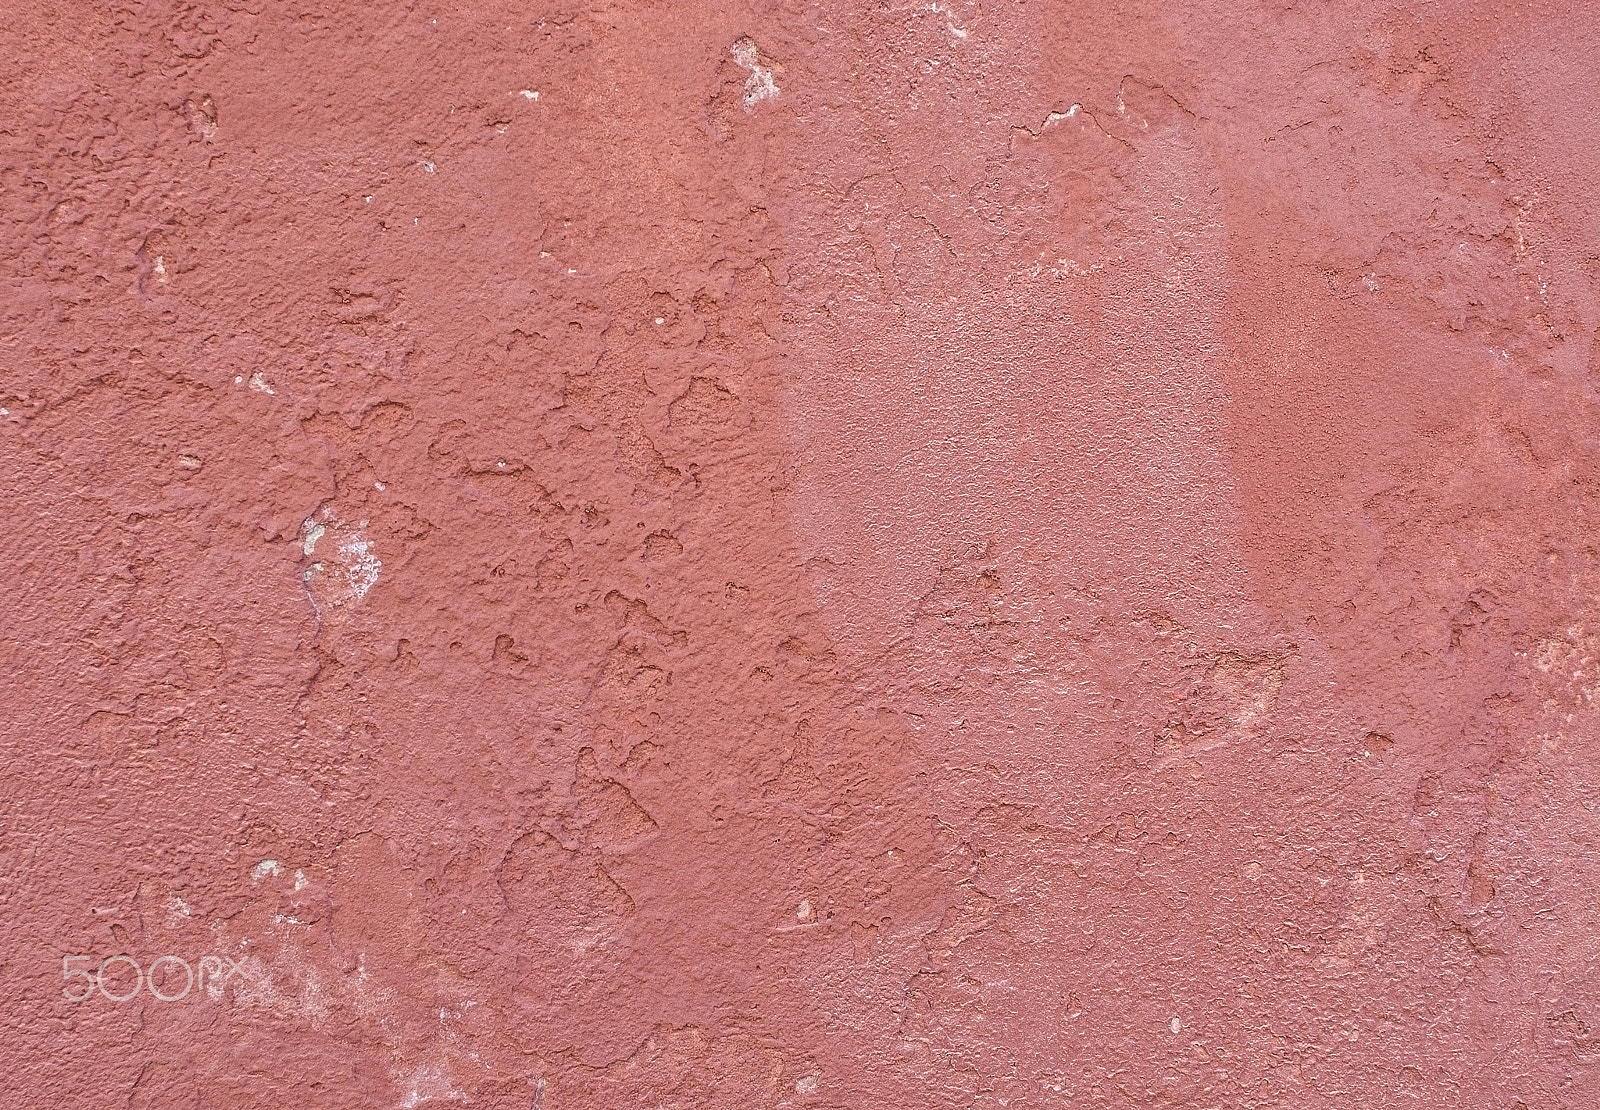 Nikon D7100 sample photo. Grungy red roughcast wall photography